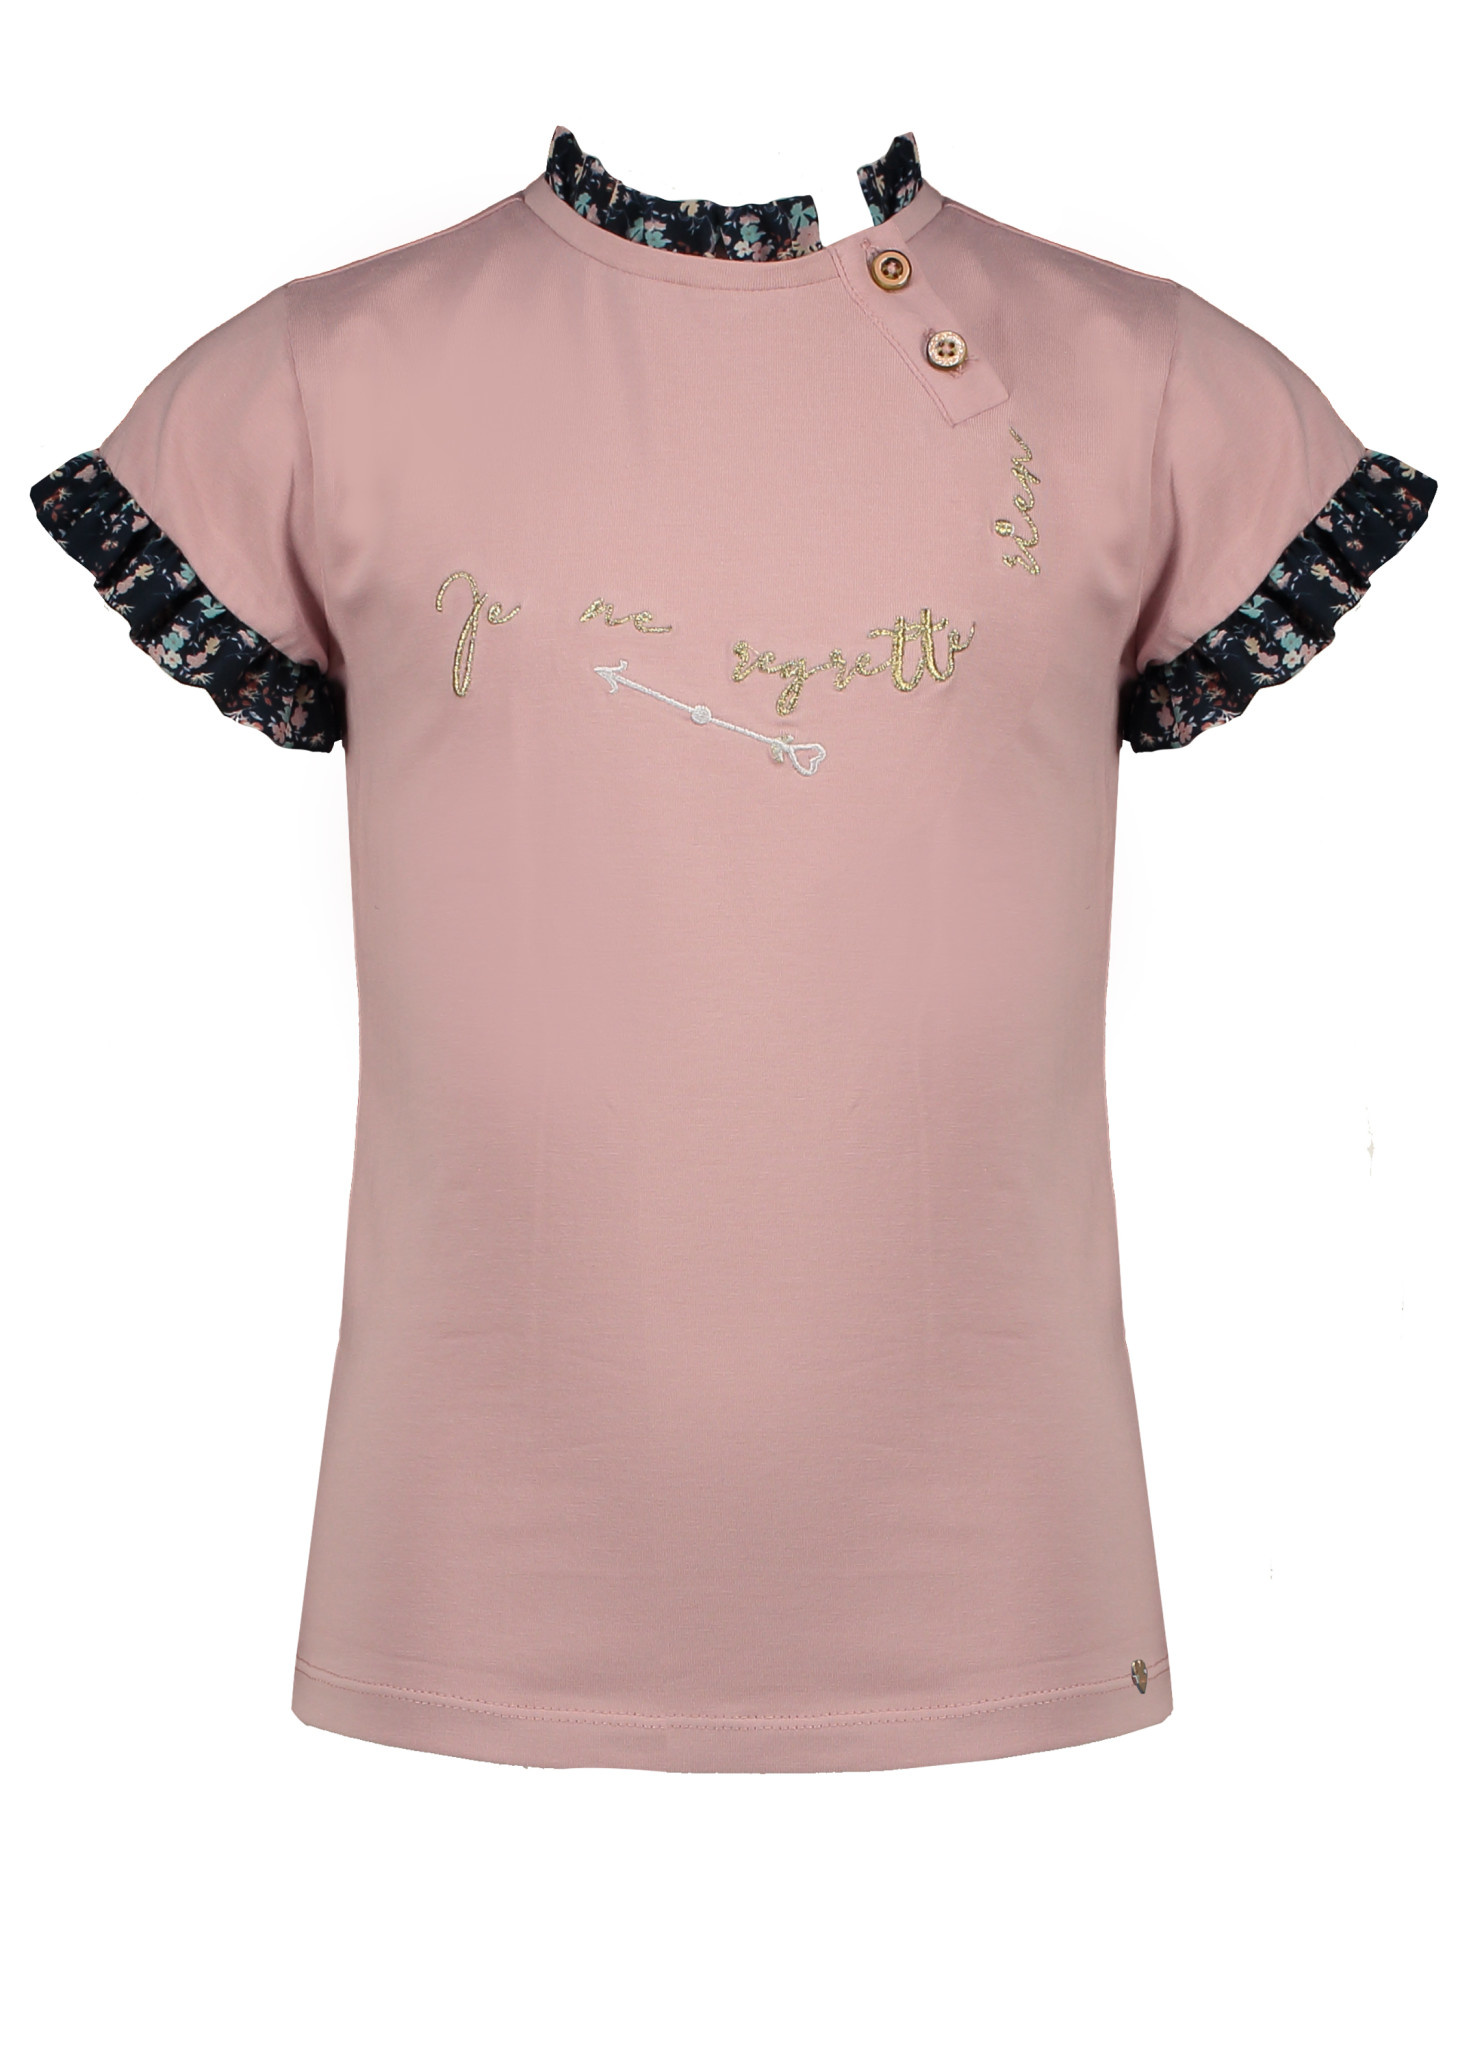 Kimy Tee with Woven Ruffles - Vintage Rose